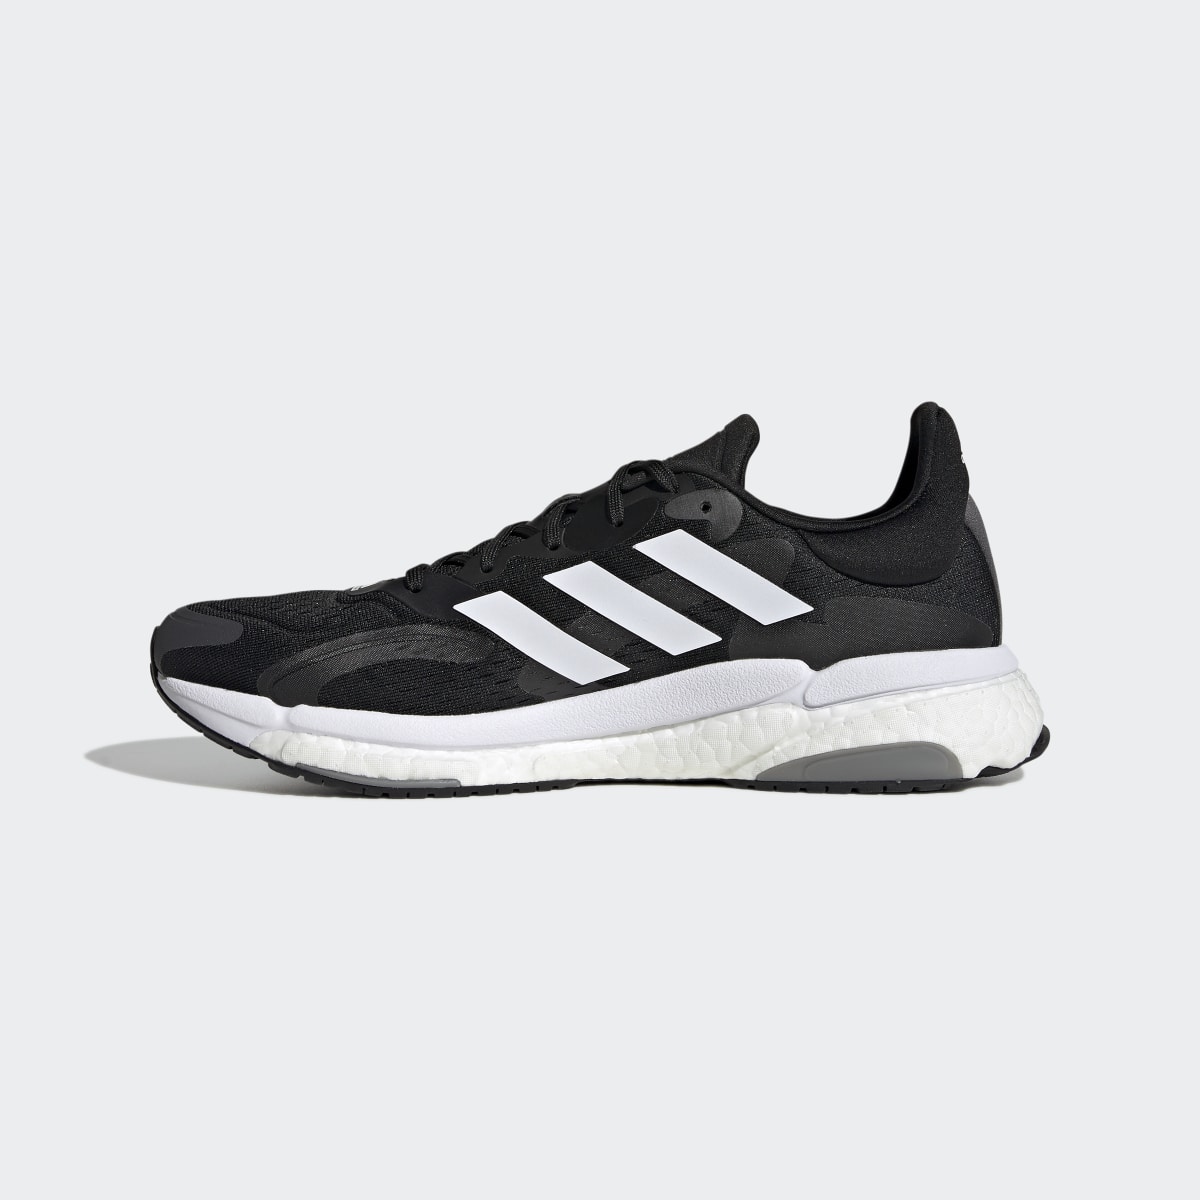 Adidas Solarboost 4 Shoes. 10